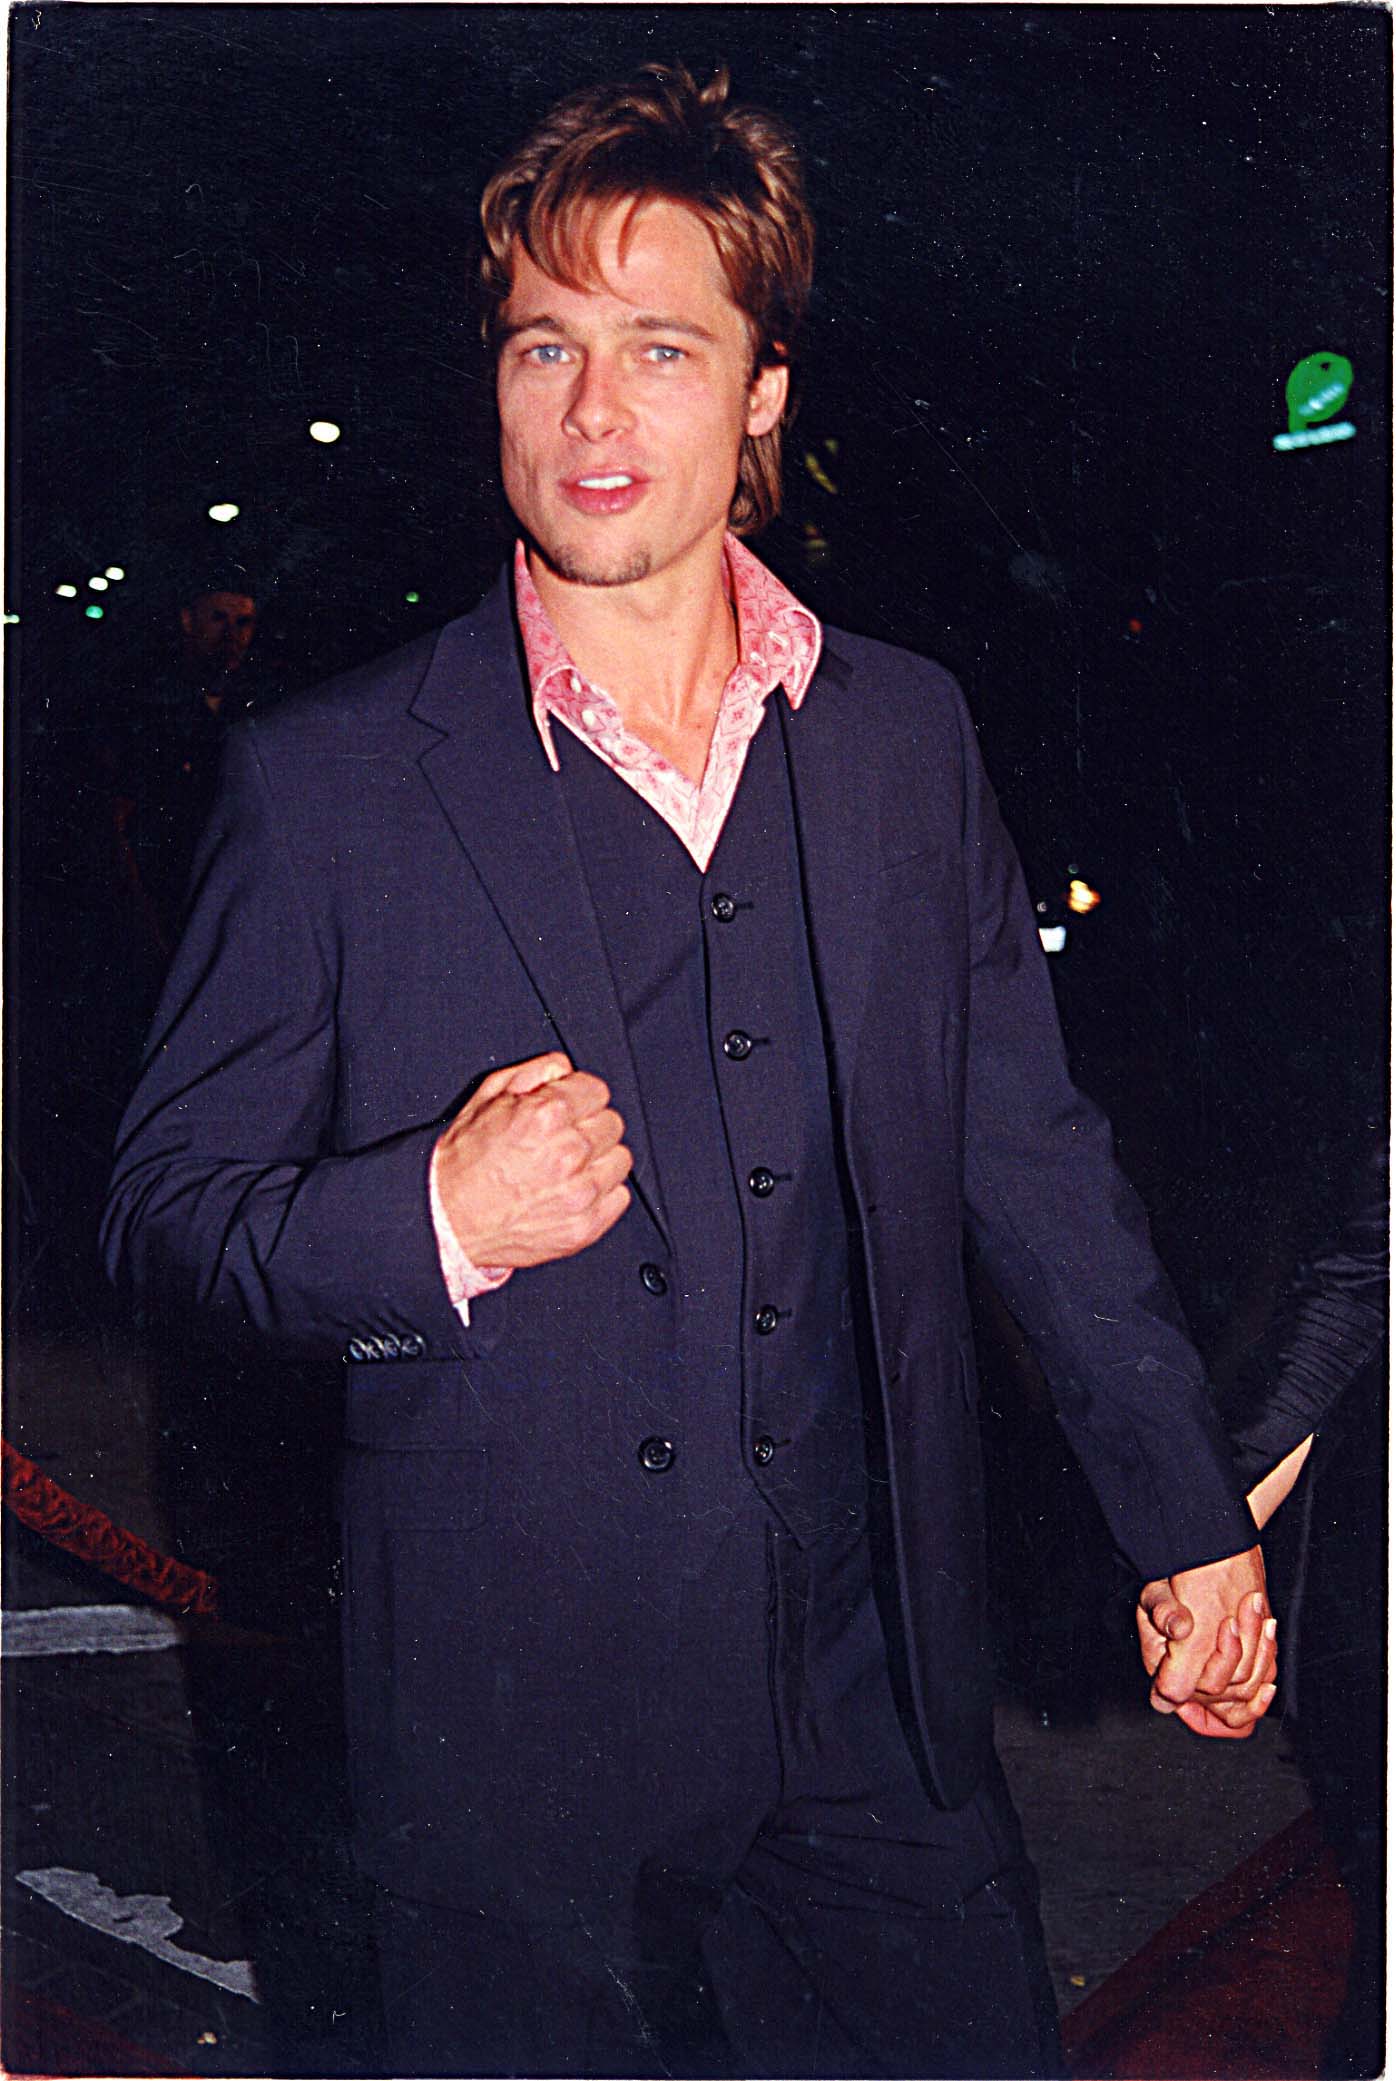 Brad Pitt during "Fight Club" Premiere in Los Angeles, California on September 9, 1999. | Source: Getty Images